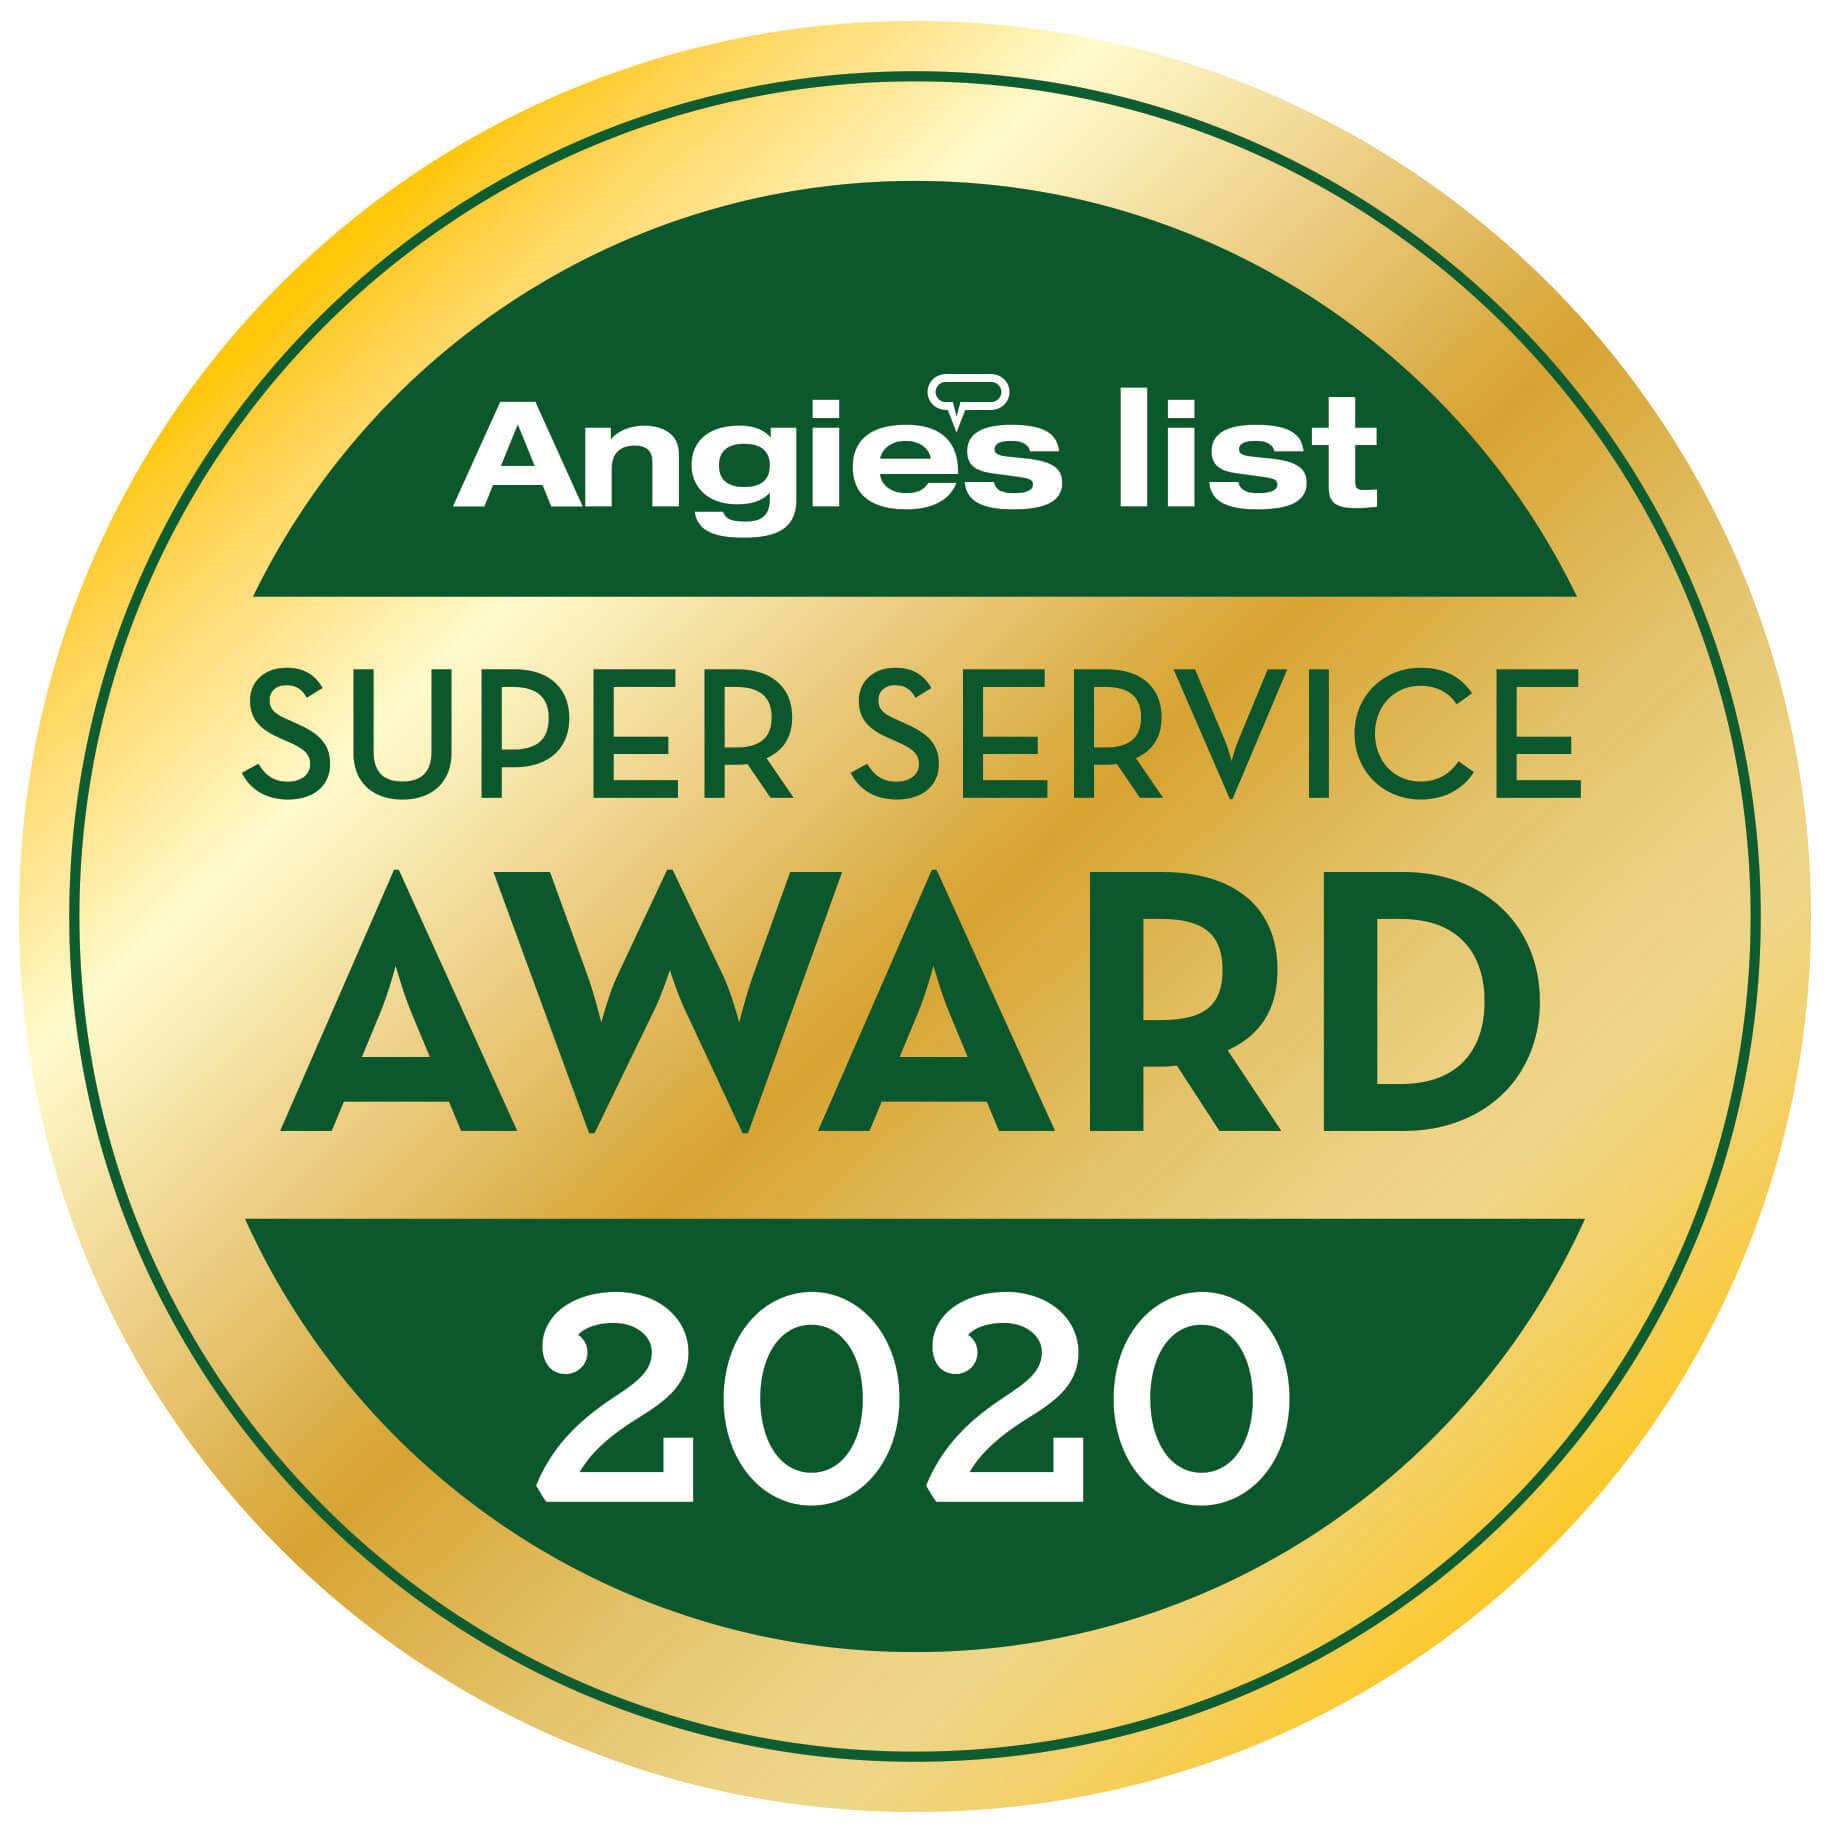 our-roofing-company-is-an-angies-list-super-service-award-winner-in-brunswick